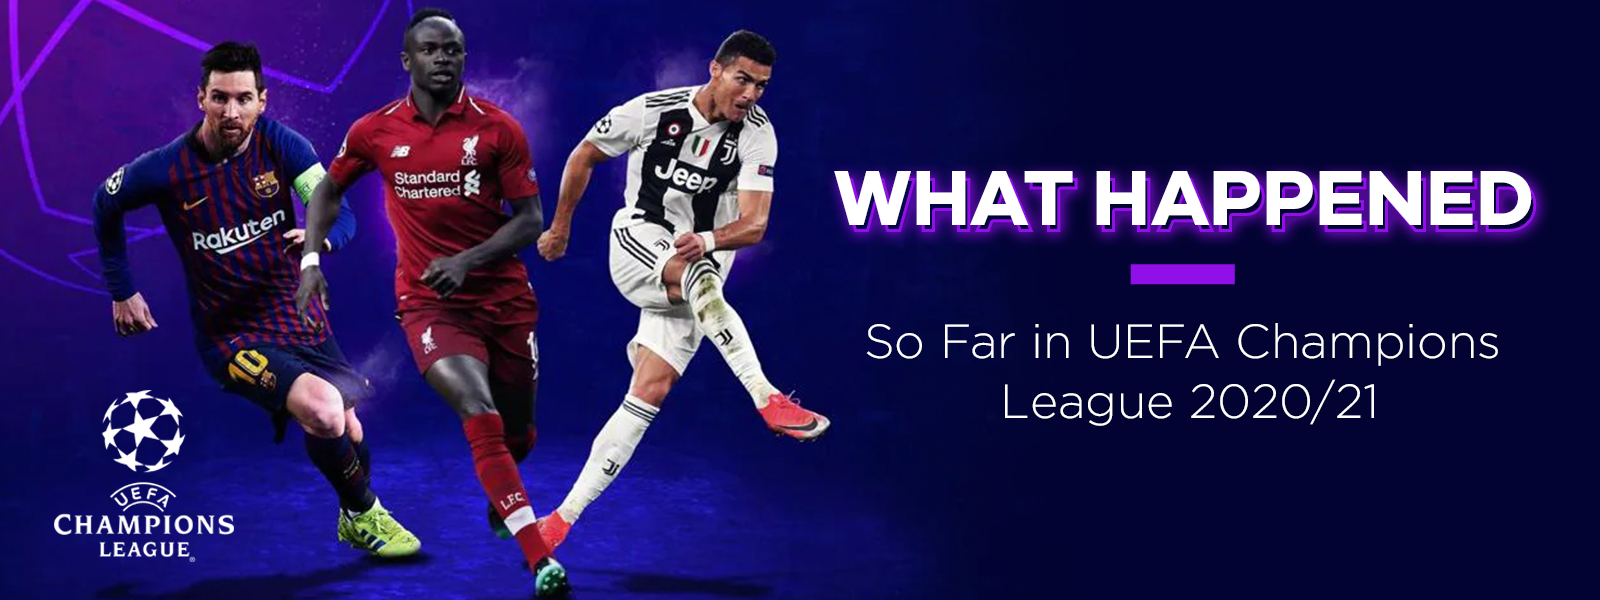 What Happened So Far In UEFA Champions League 2020/21